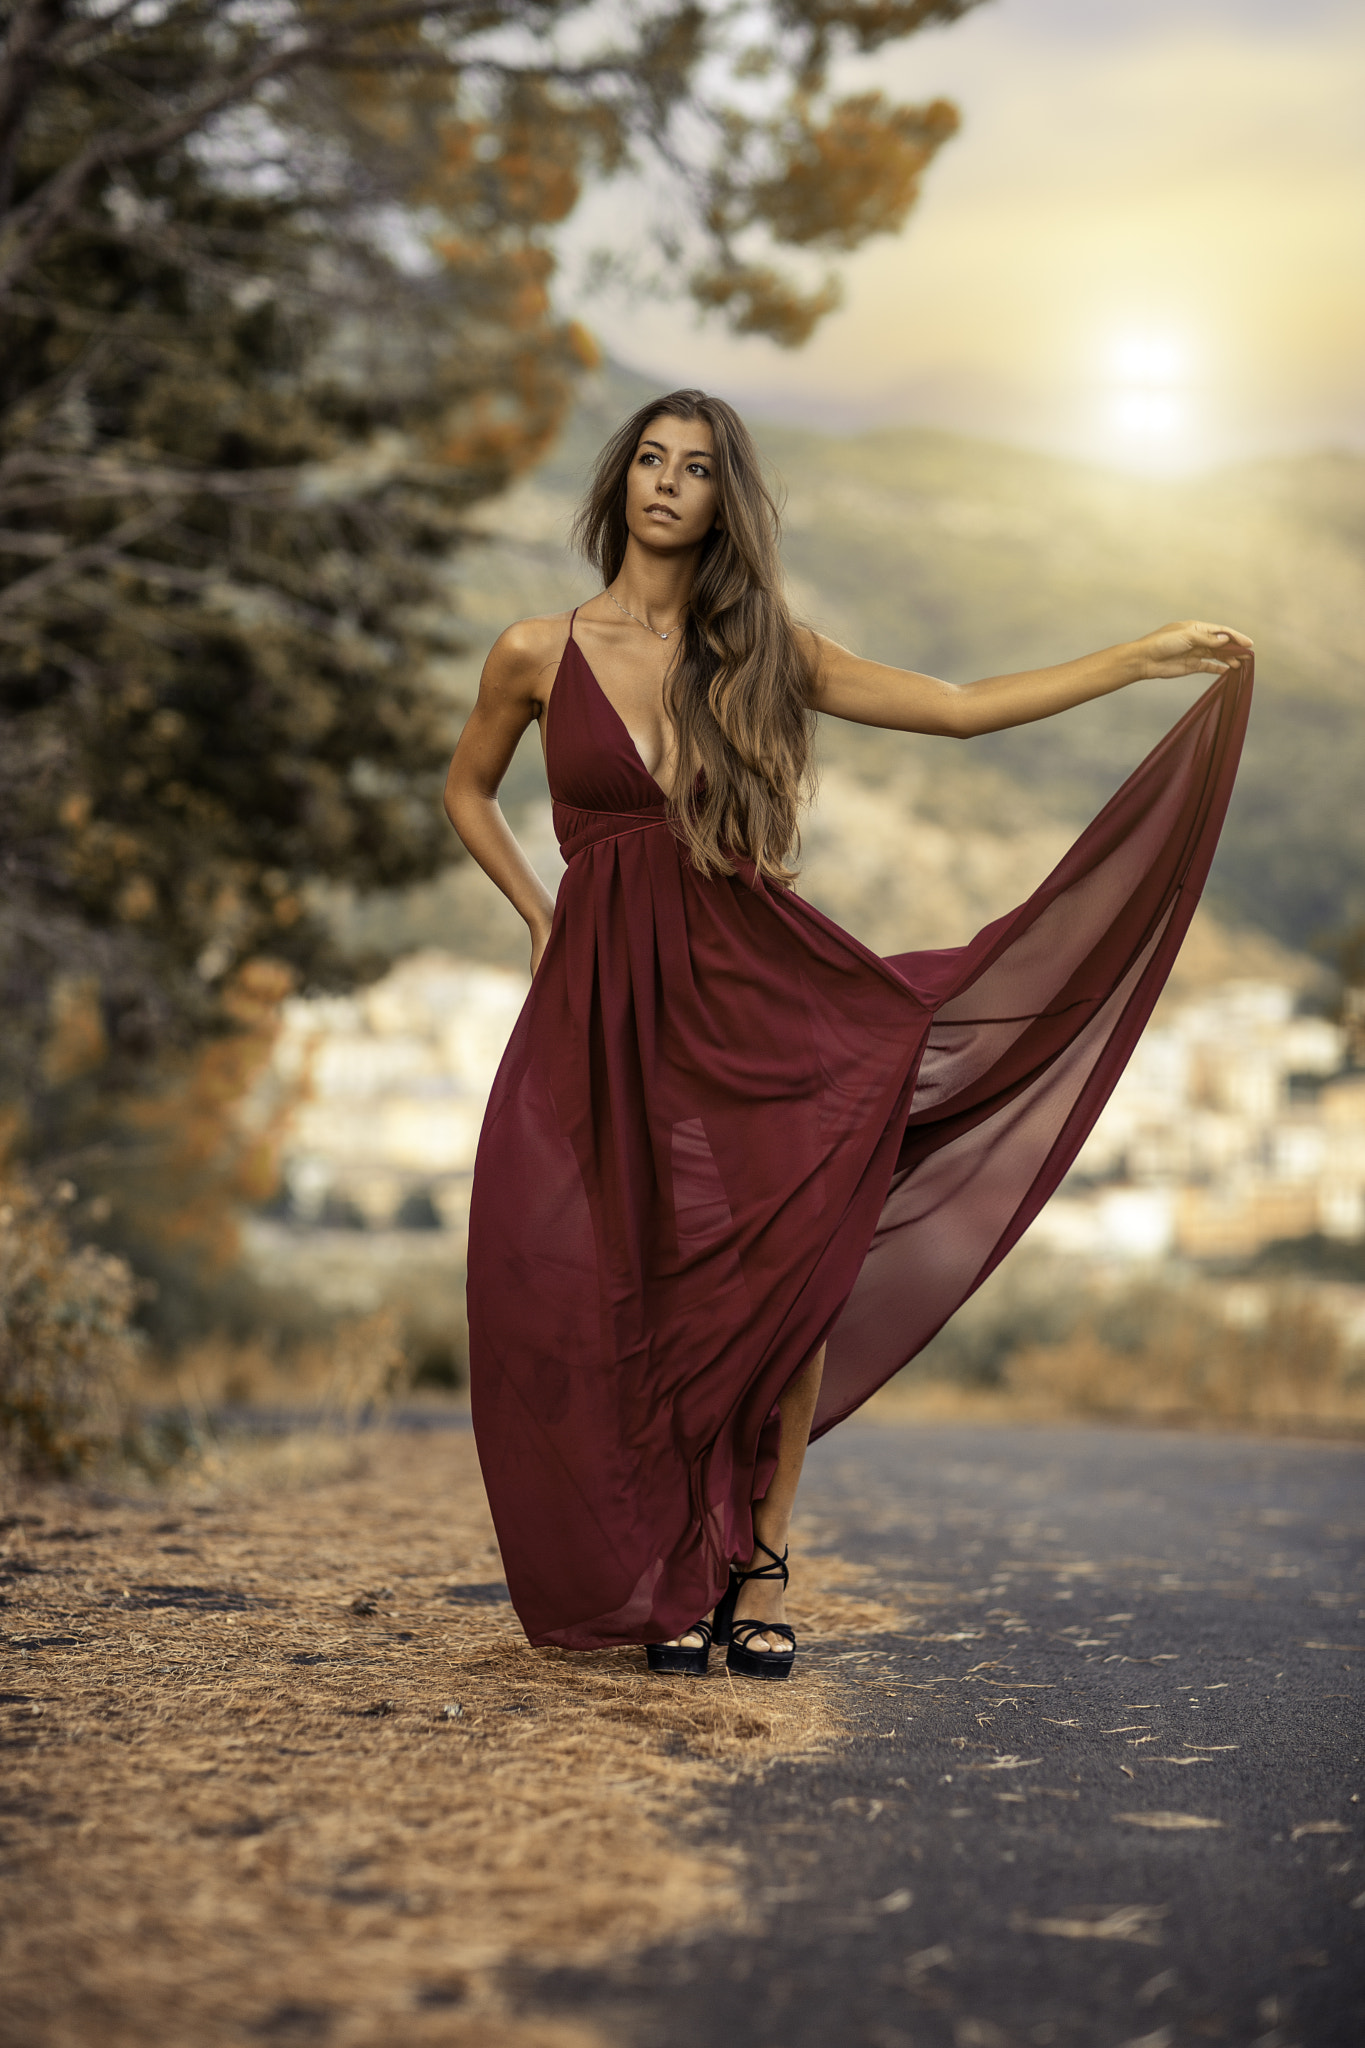 Alessandro Di Cicco Women Brunette Long Hair Wavy Hair Dress Red Clothing Looking Away 1365x2048